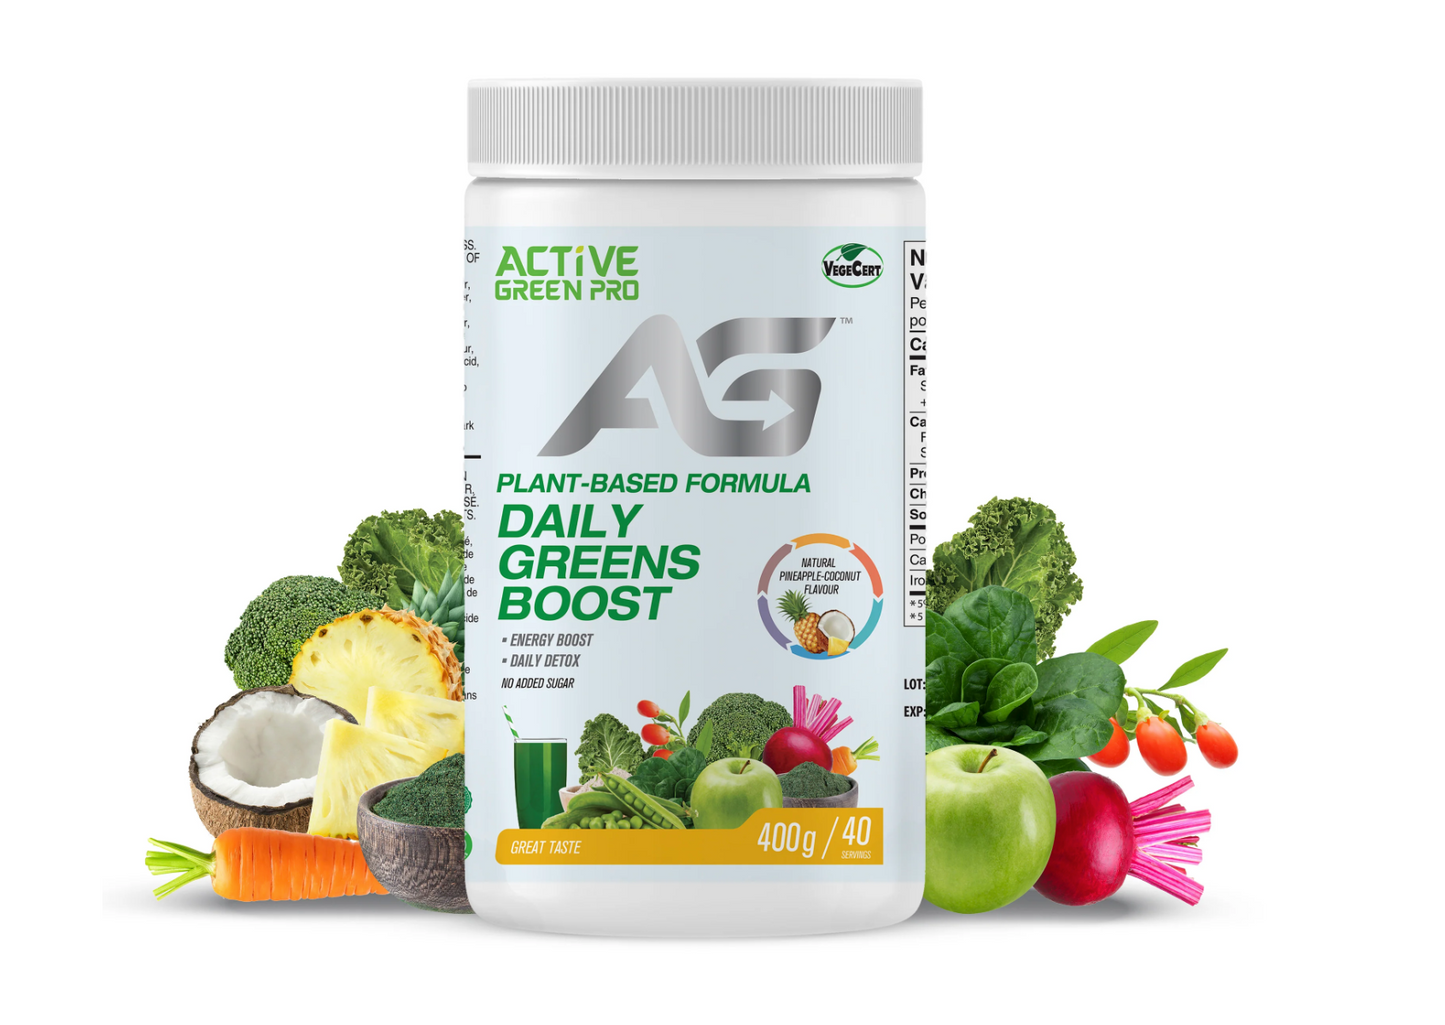 Active Greens Daily Greens Boost Greens Powder- Natural Pineapple-Coconut Flavor | 400g